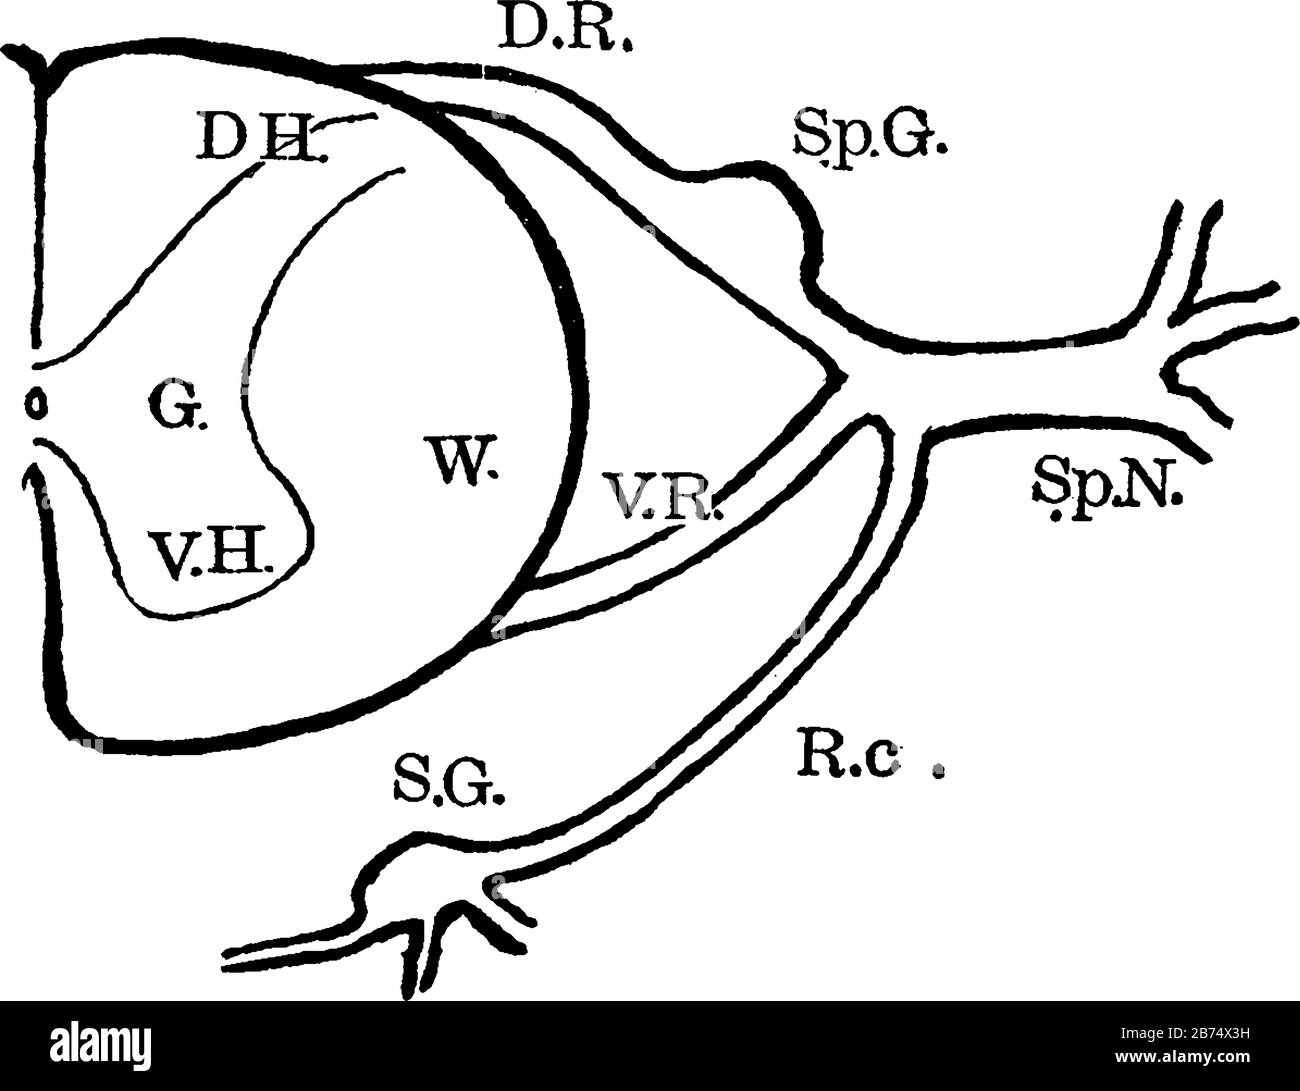 Diagram showing anatomy of the spinal nerve roots and adjacent parts, vintage line drawing or engraving illustration. Stock Vector